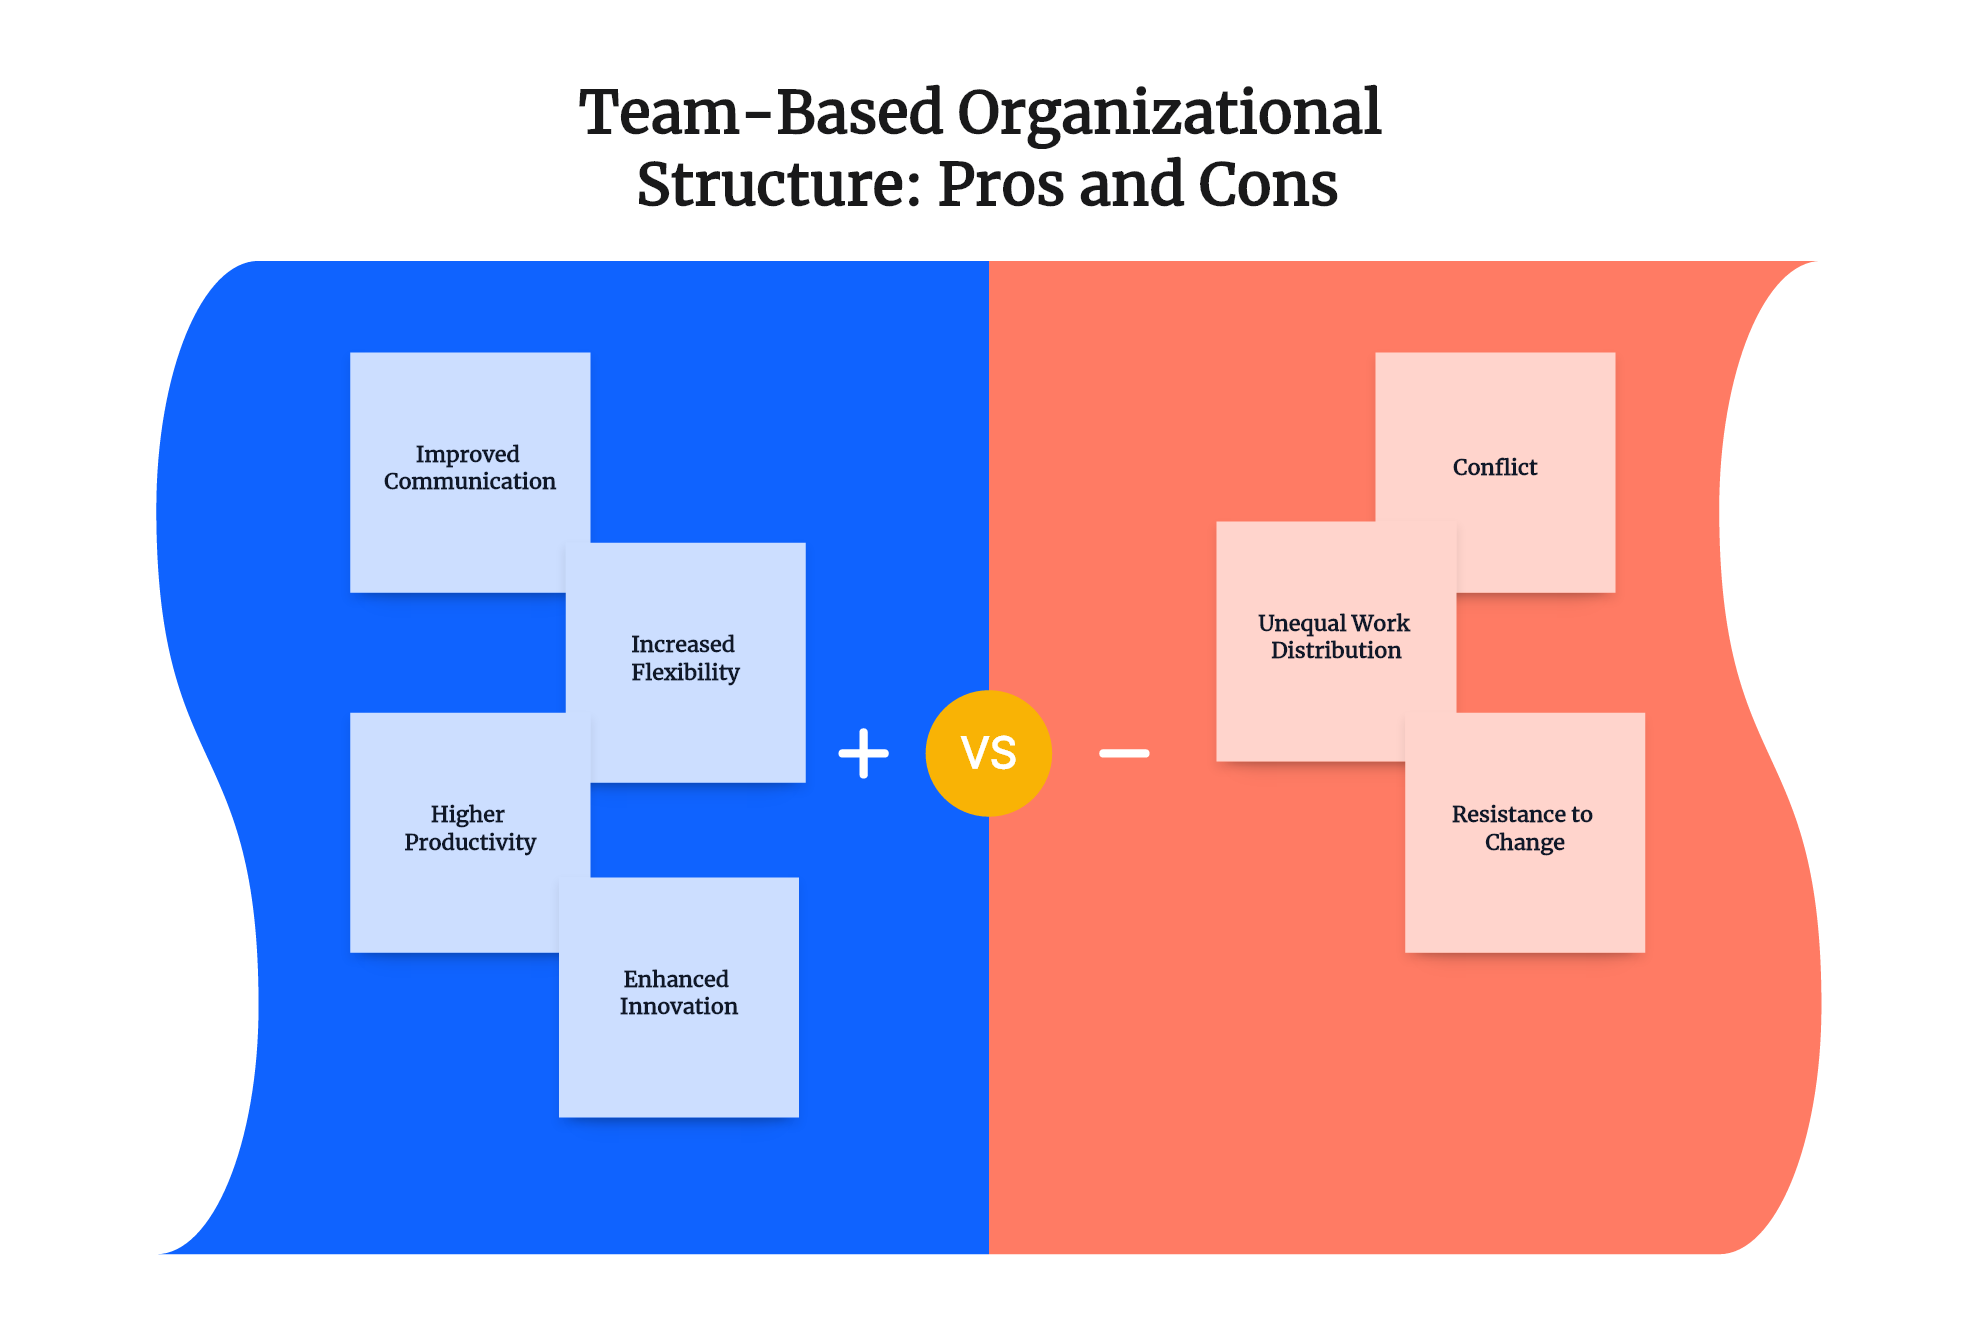 Team-Based Organizational Structure: Pros and Cons